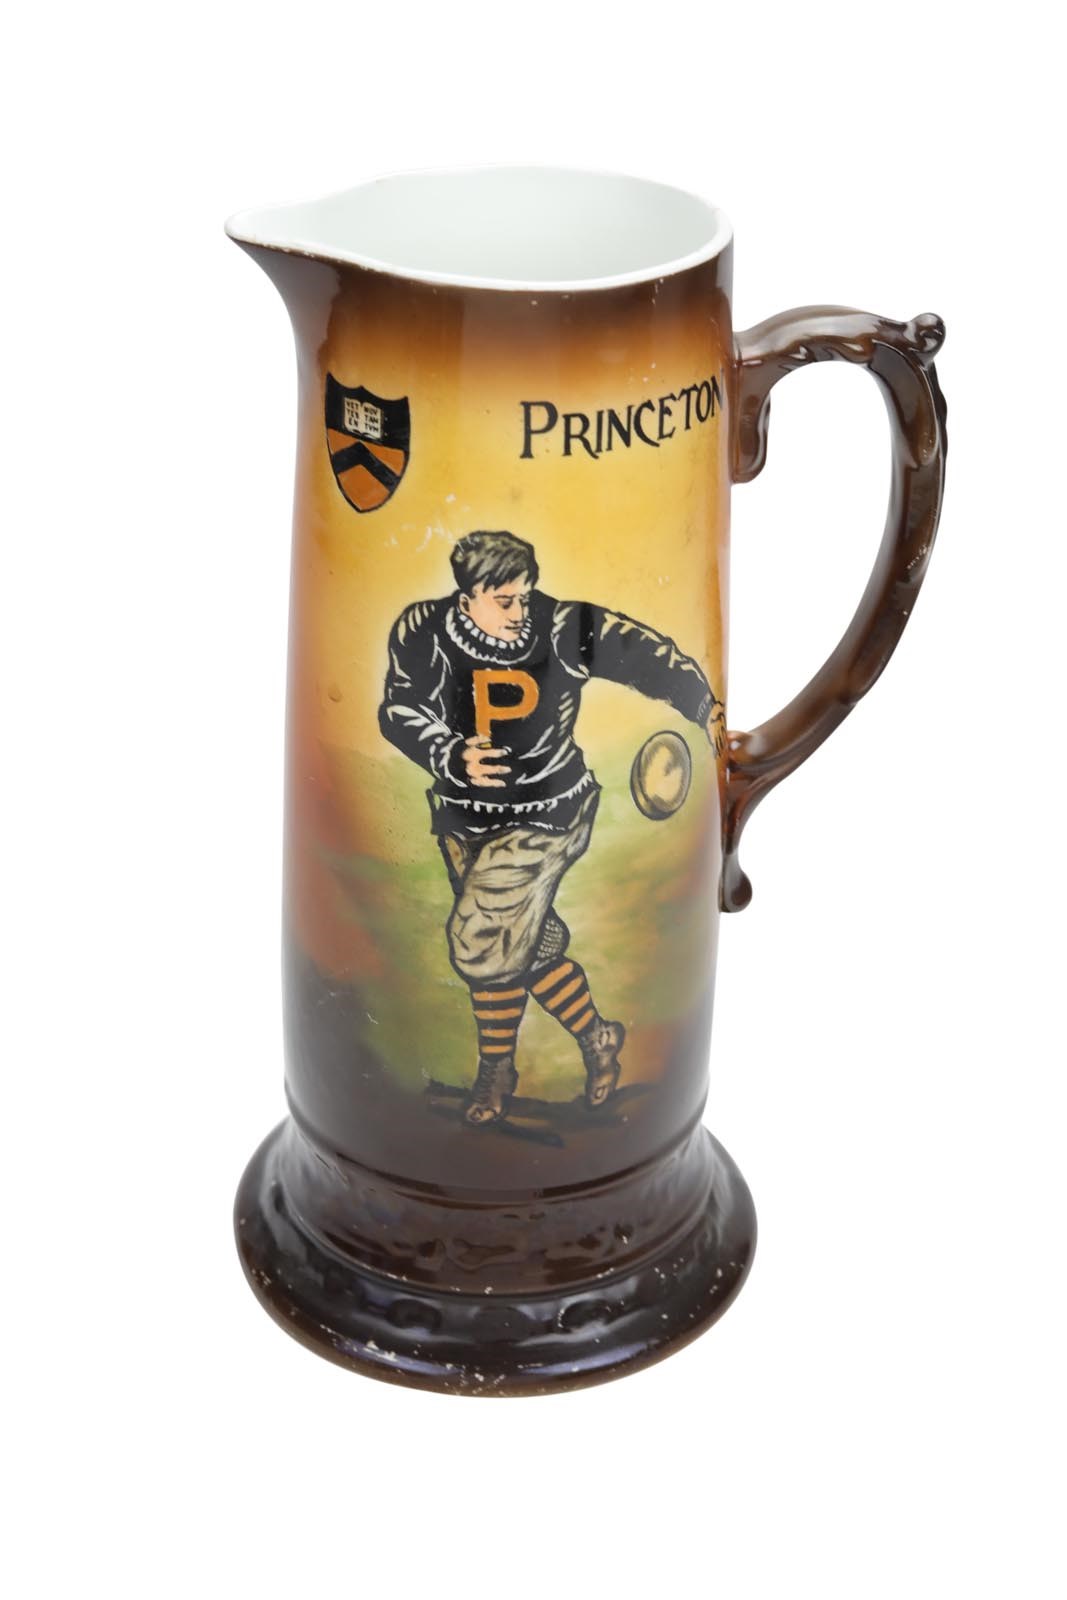 Football - Early 1900's Princeton Football Large Stein